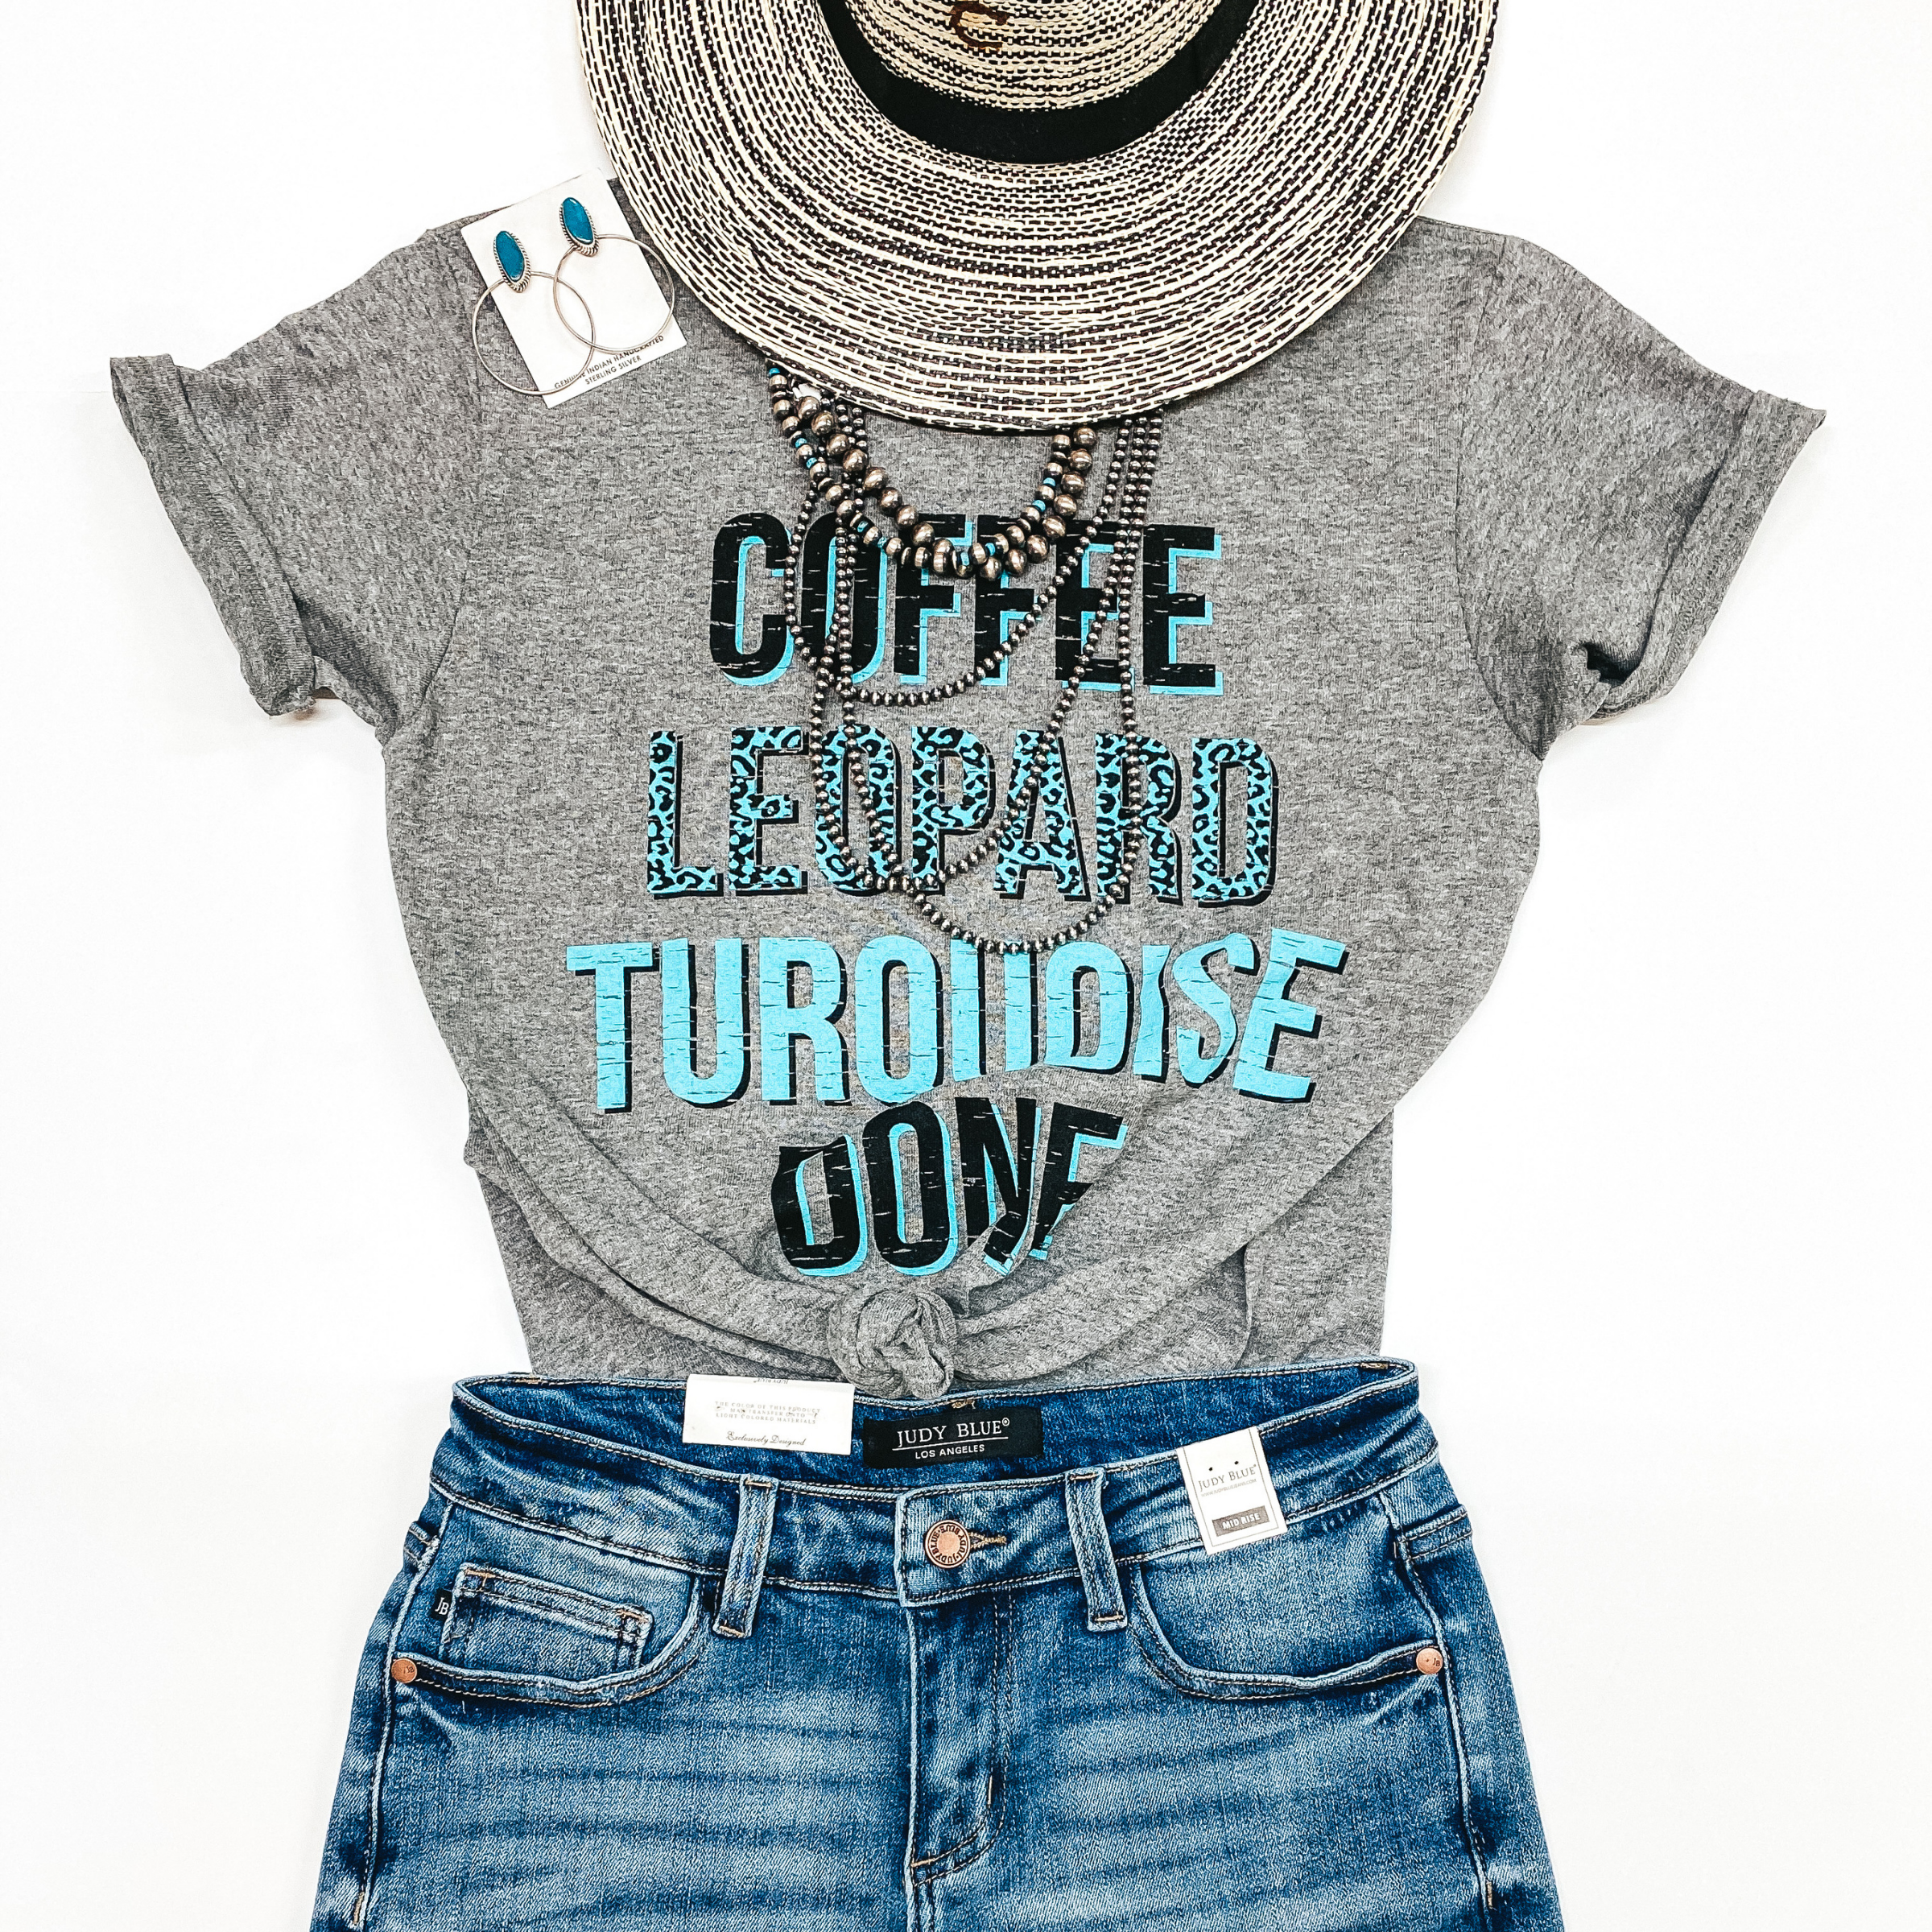 A grey graphic tee that says "Coffee Leopard Turquoise Done". Pictured with denim shorts, genuine Navajo jewelry, and a straw hat.